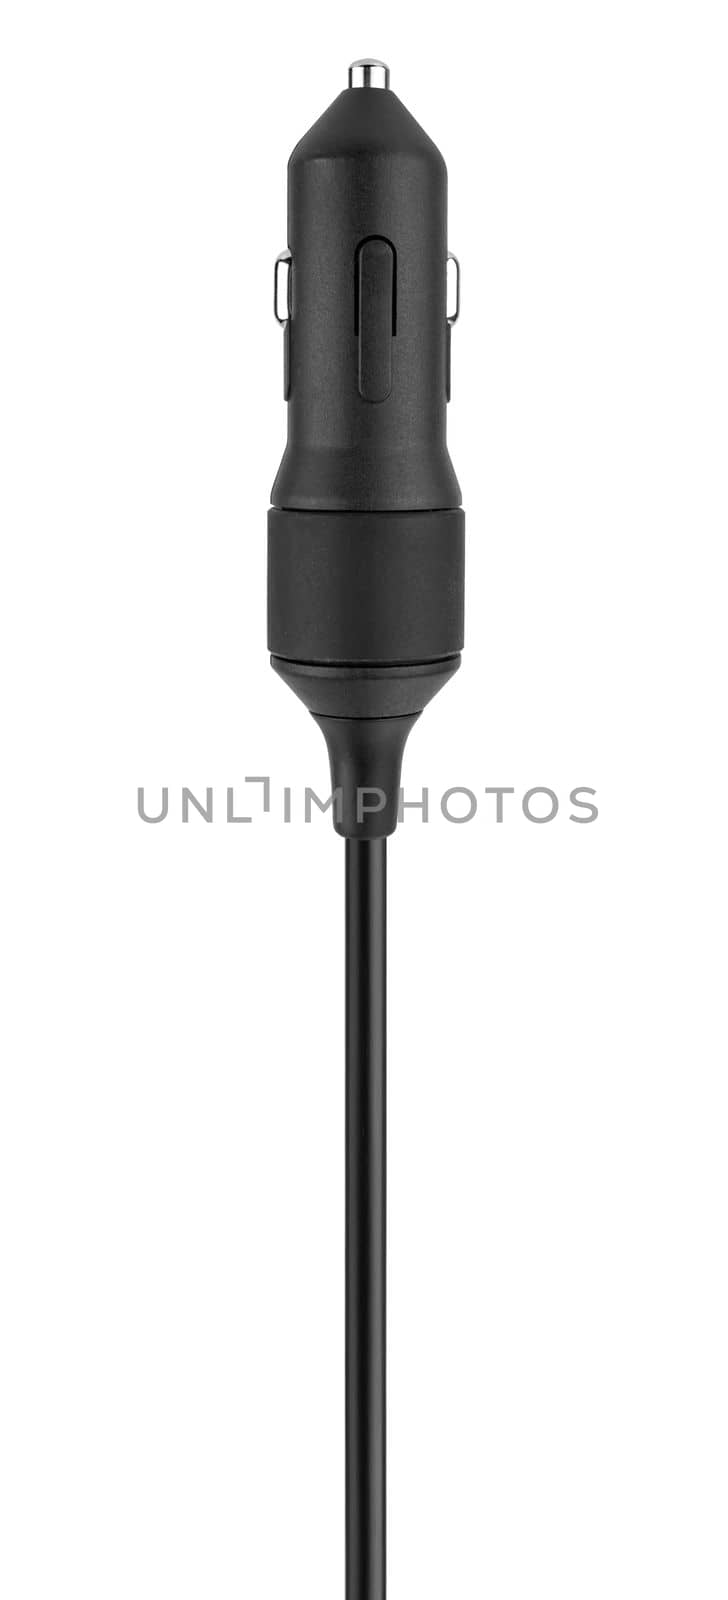 cable and cigarette lighter plug isolated on white background